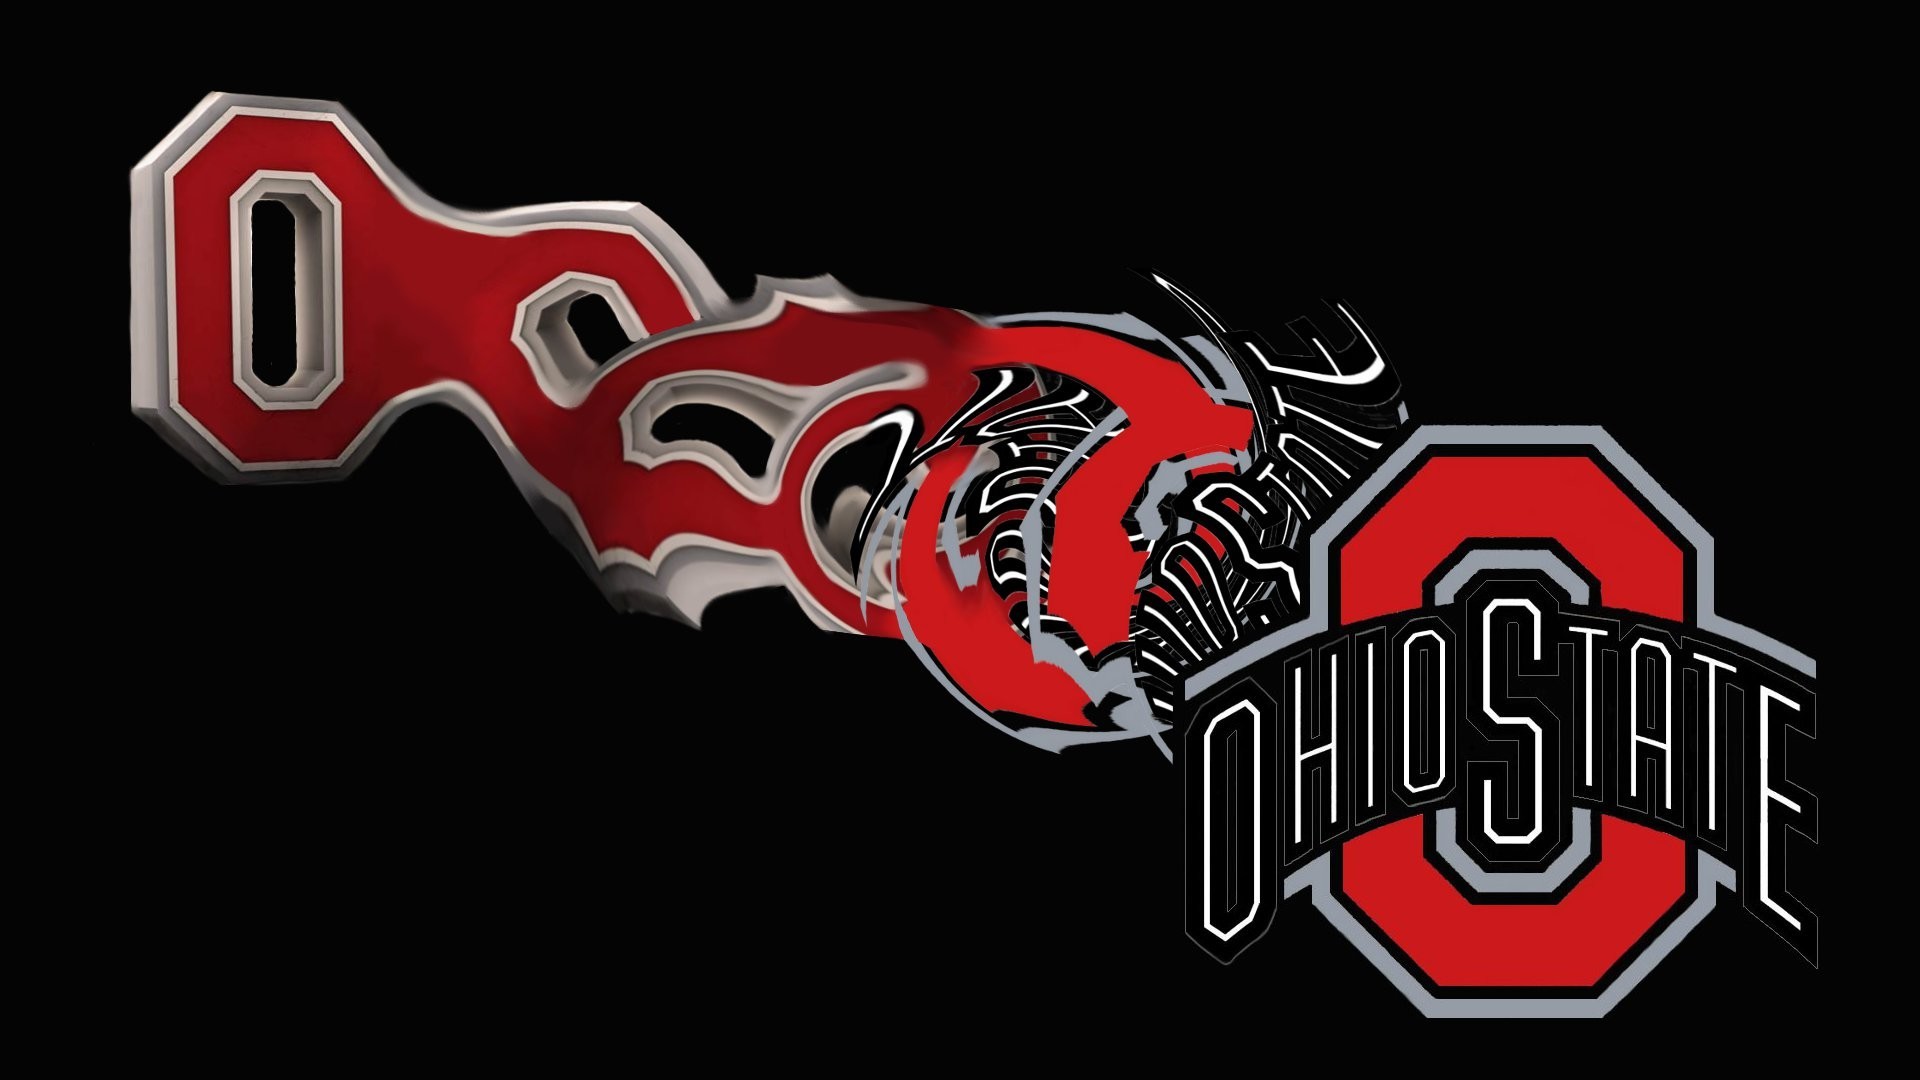 1920x1080  of-OSU-for-fans-of-Ohio-State-Football-Ohio-Ohio-State-OSU-Buckeyes-Br-  wallpaper-wp40013434 - hdwallpaper20.com